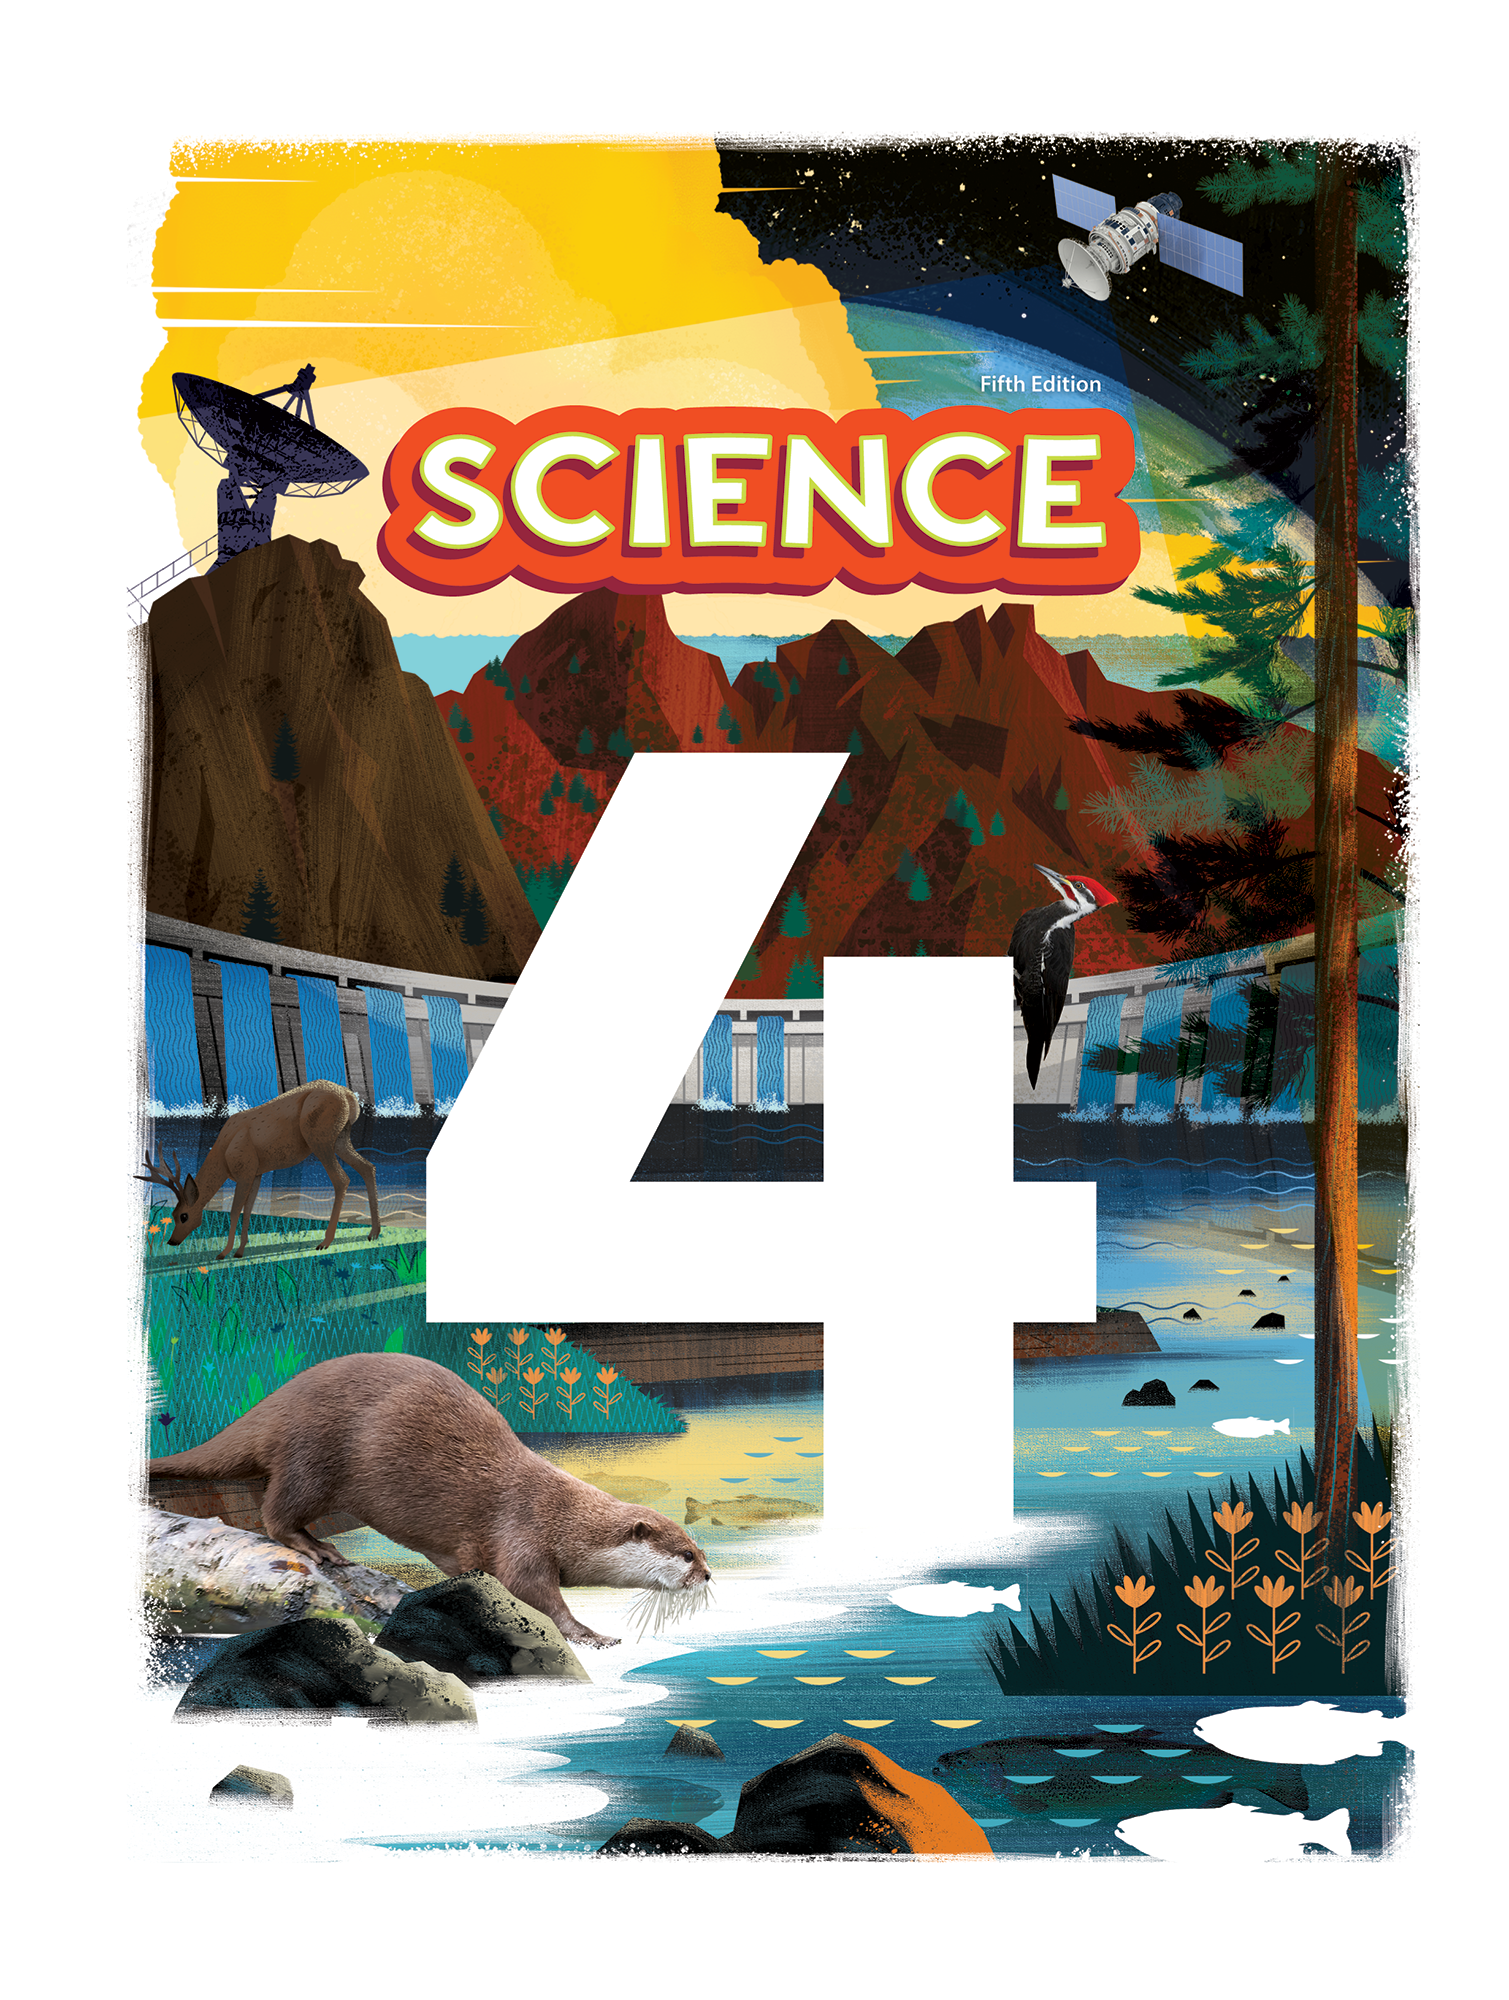 Science 4 Student Edition, 5th ed.